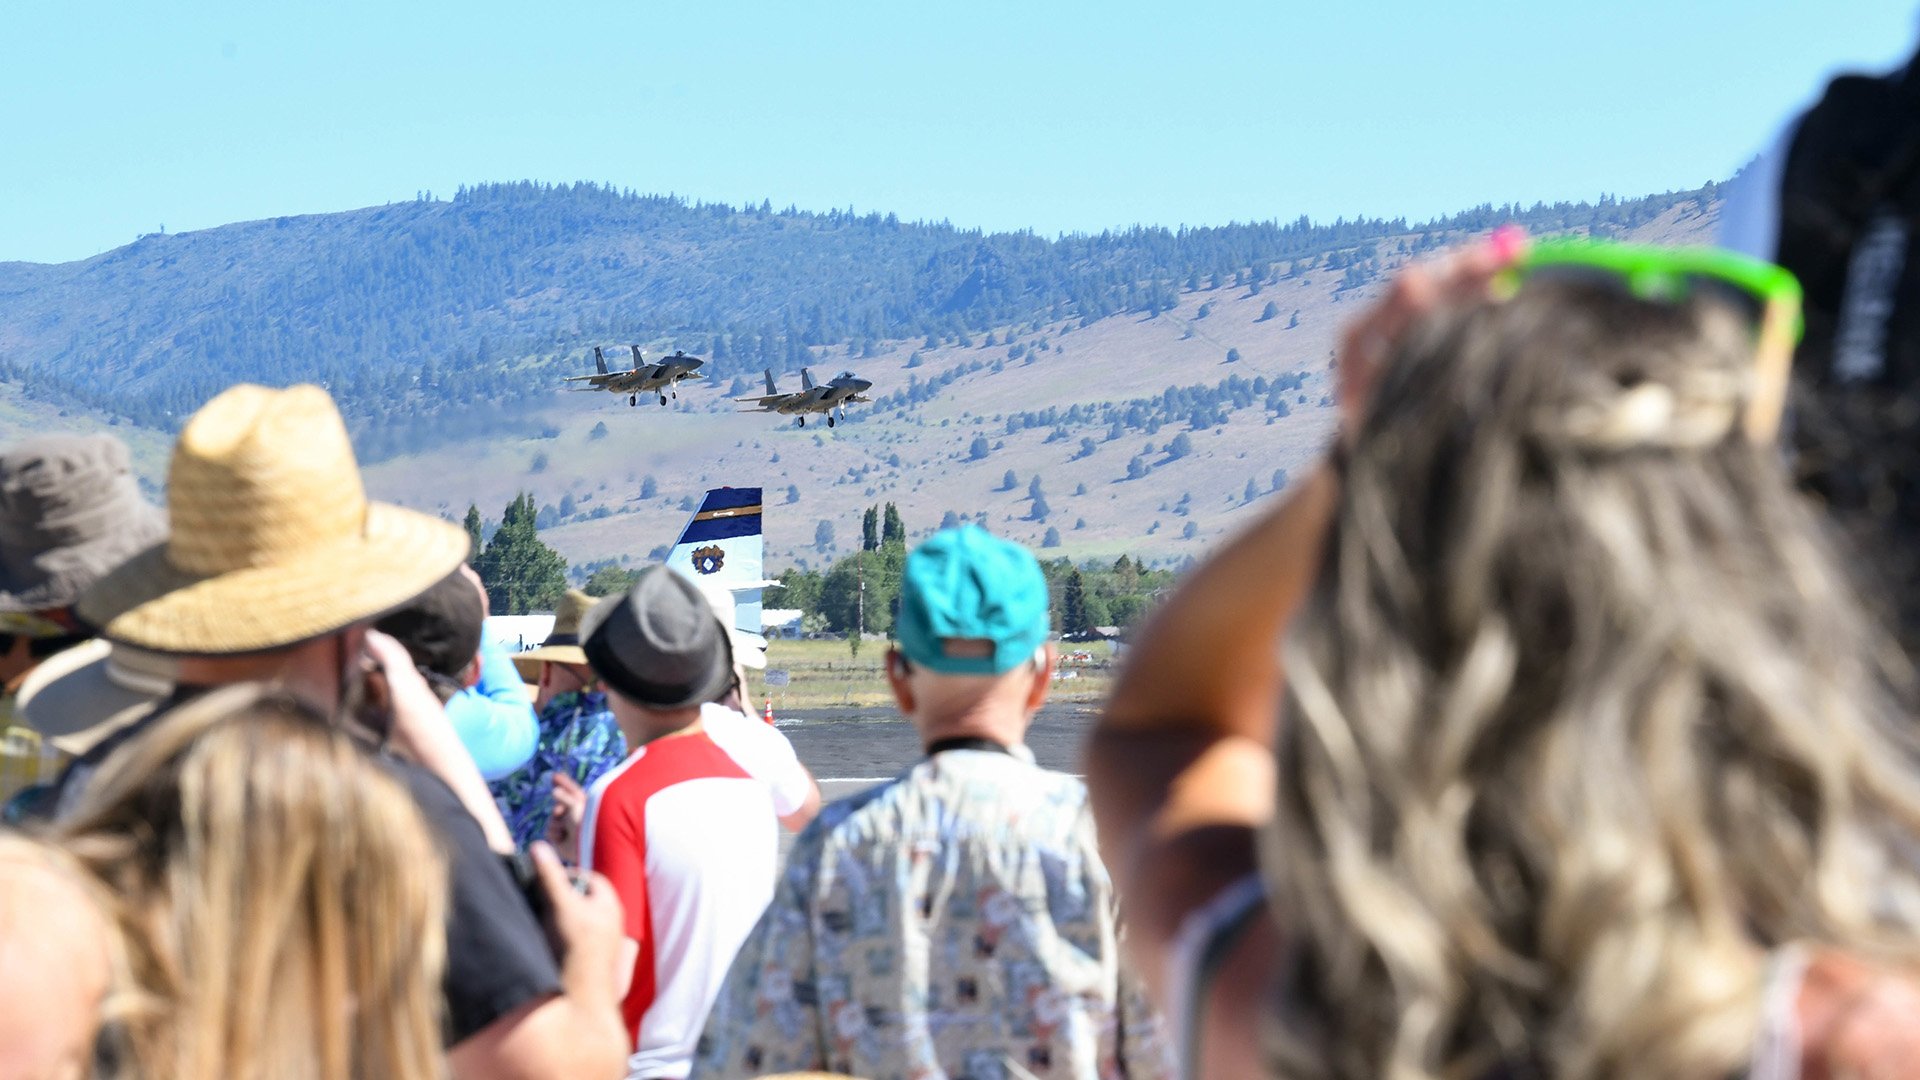  Guests watch inbound F-15s from the 173rd Fighter Wing, during the Sentry Eagle Open House June 24, 2022, at Kingsley Field in Klamath Falls, Ore. The open house allowed Kingsley Field to provide a behind-the-scenes look at the F-15 training mission